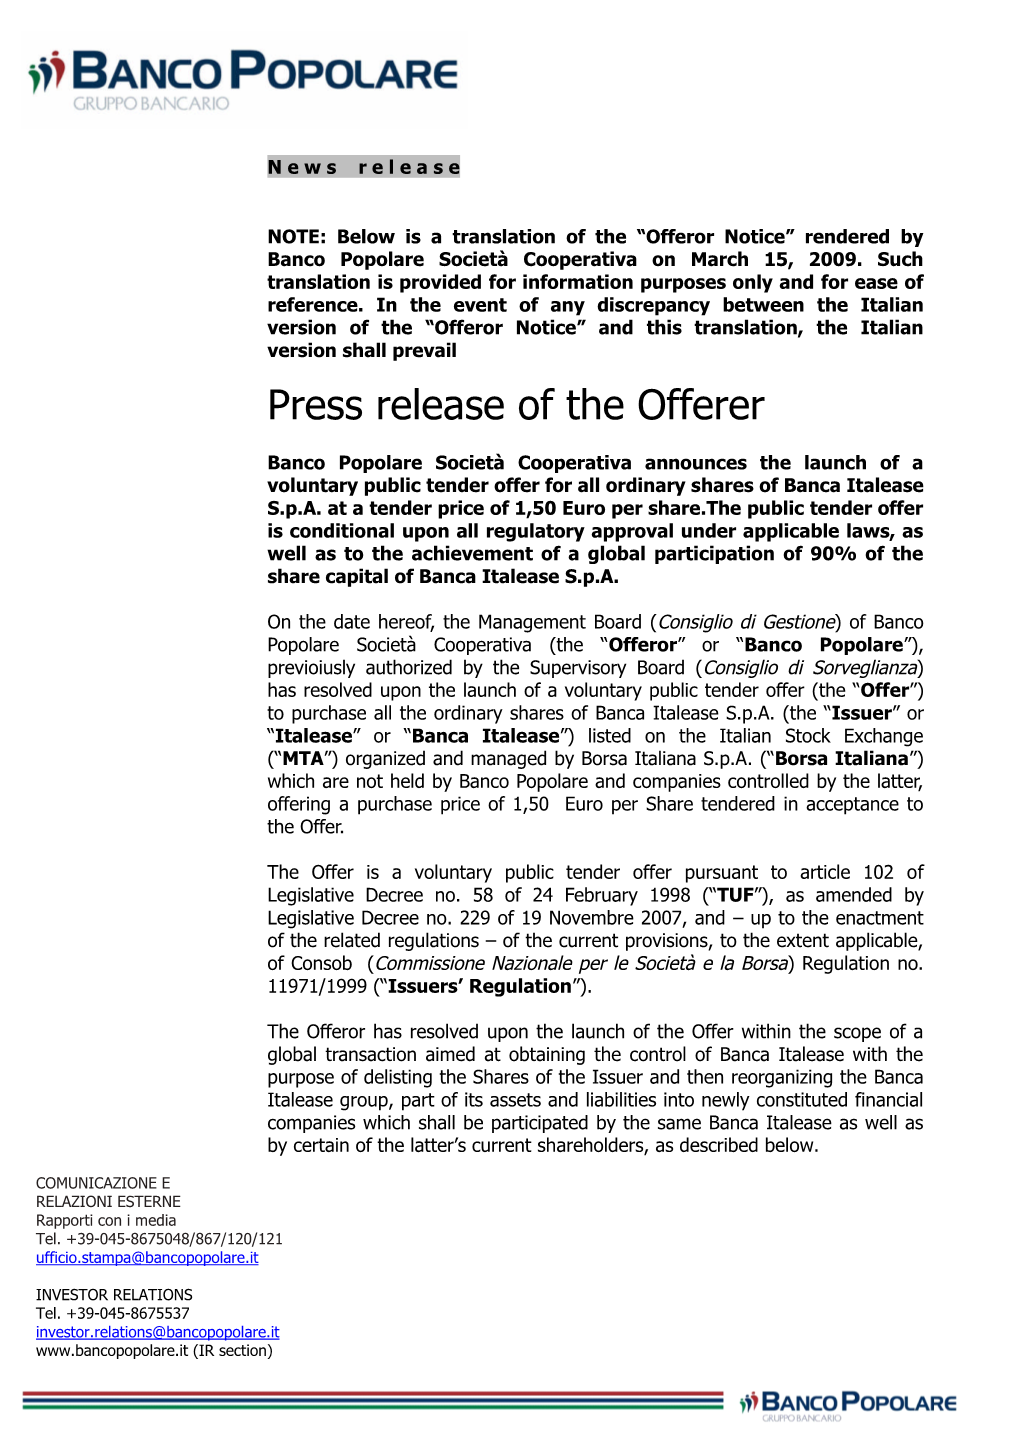 Press Release of the Offerer